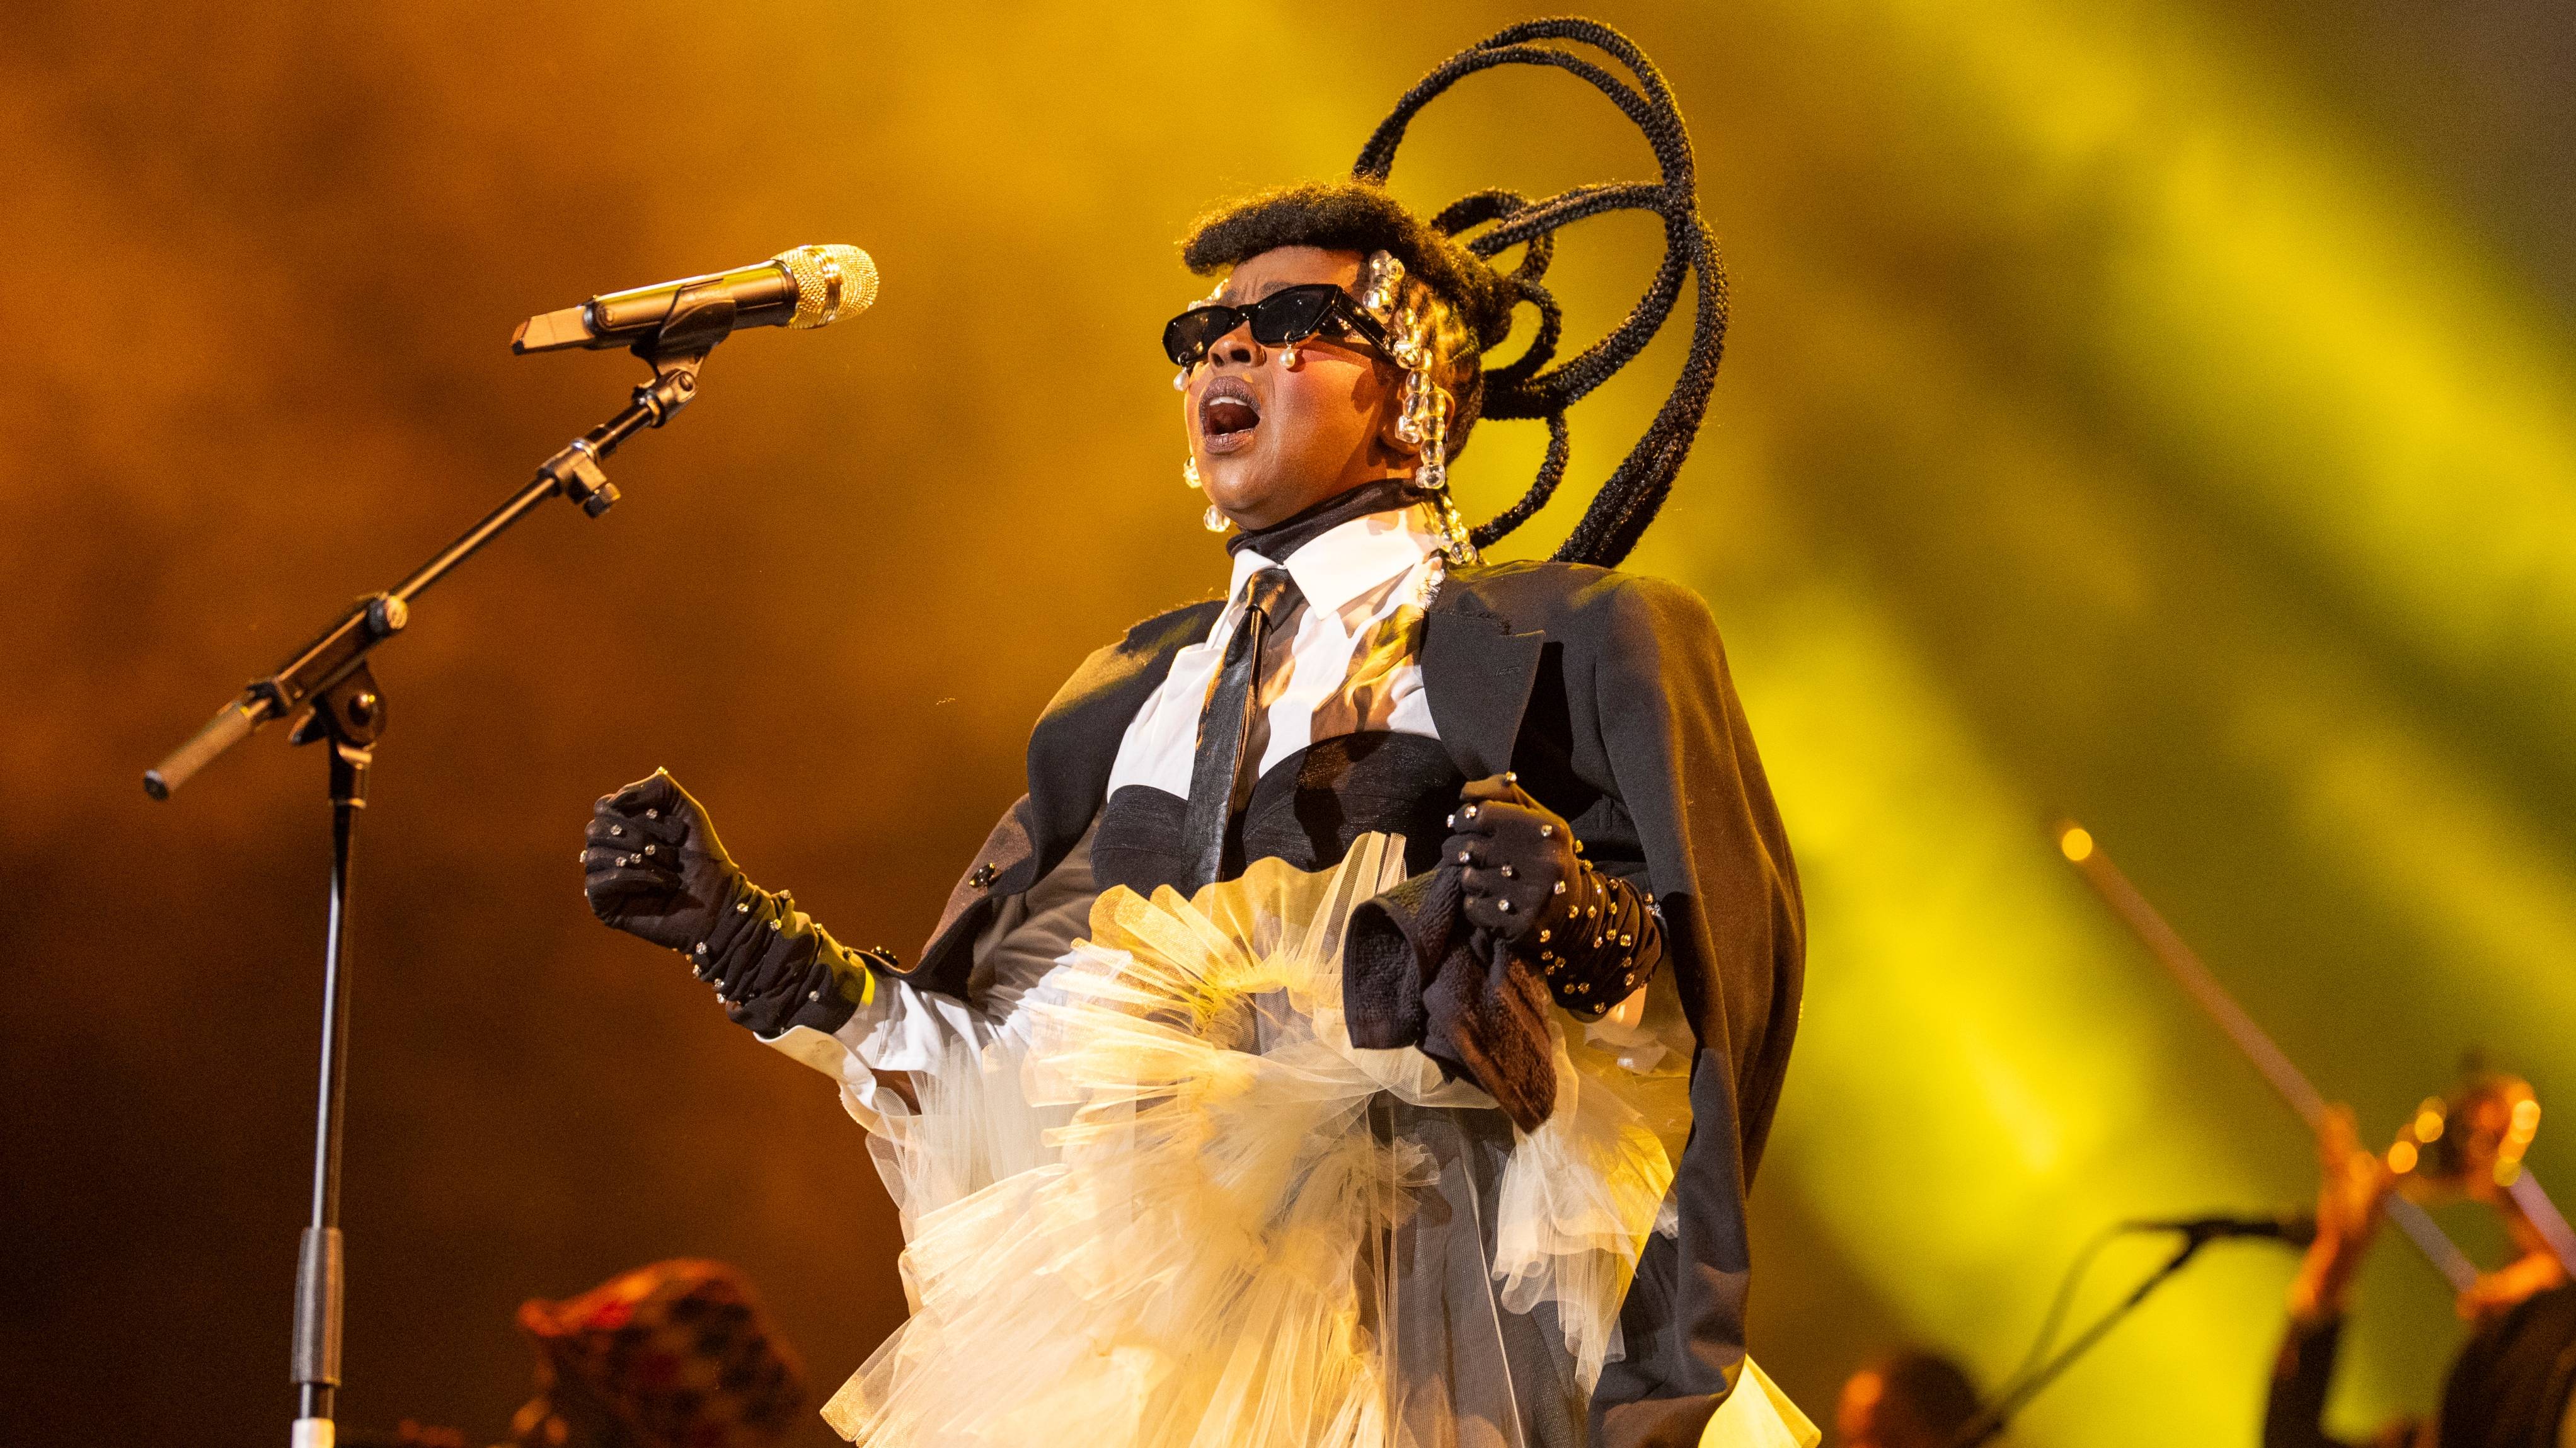 Lauryn Hill Addresses Her Lateness at Los Angeles Show